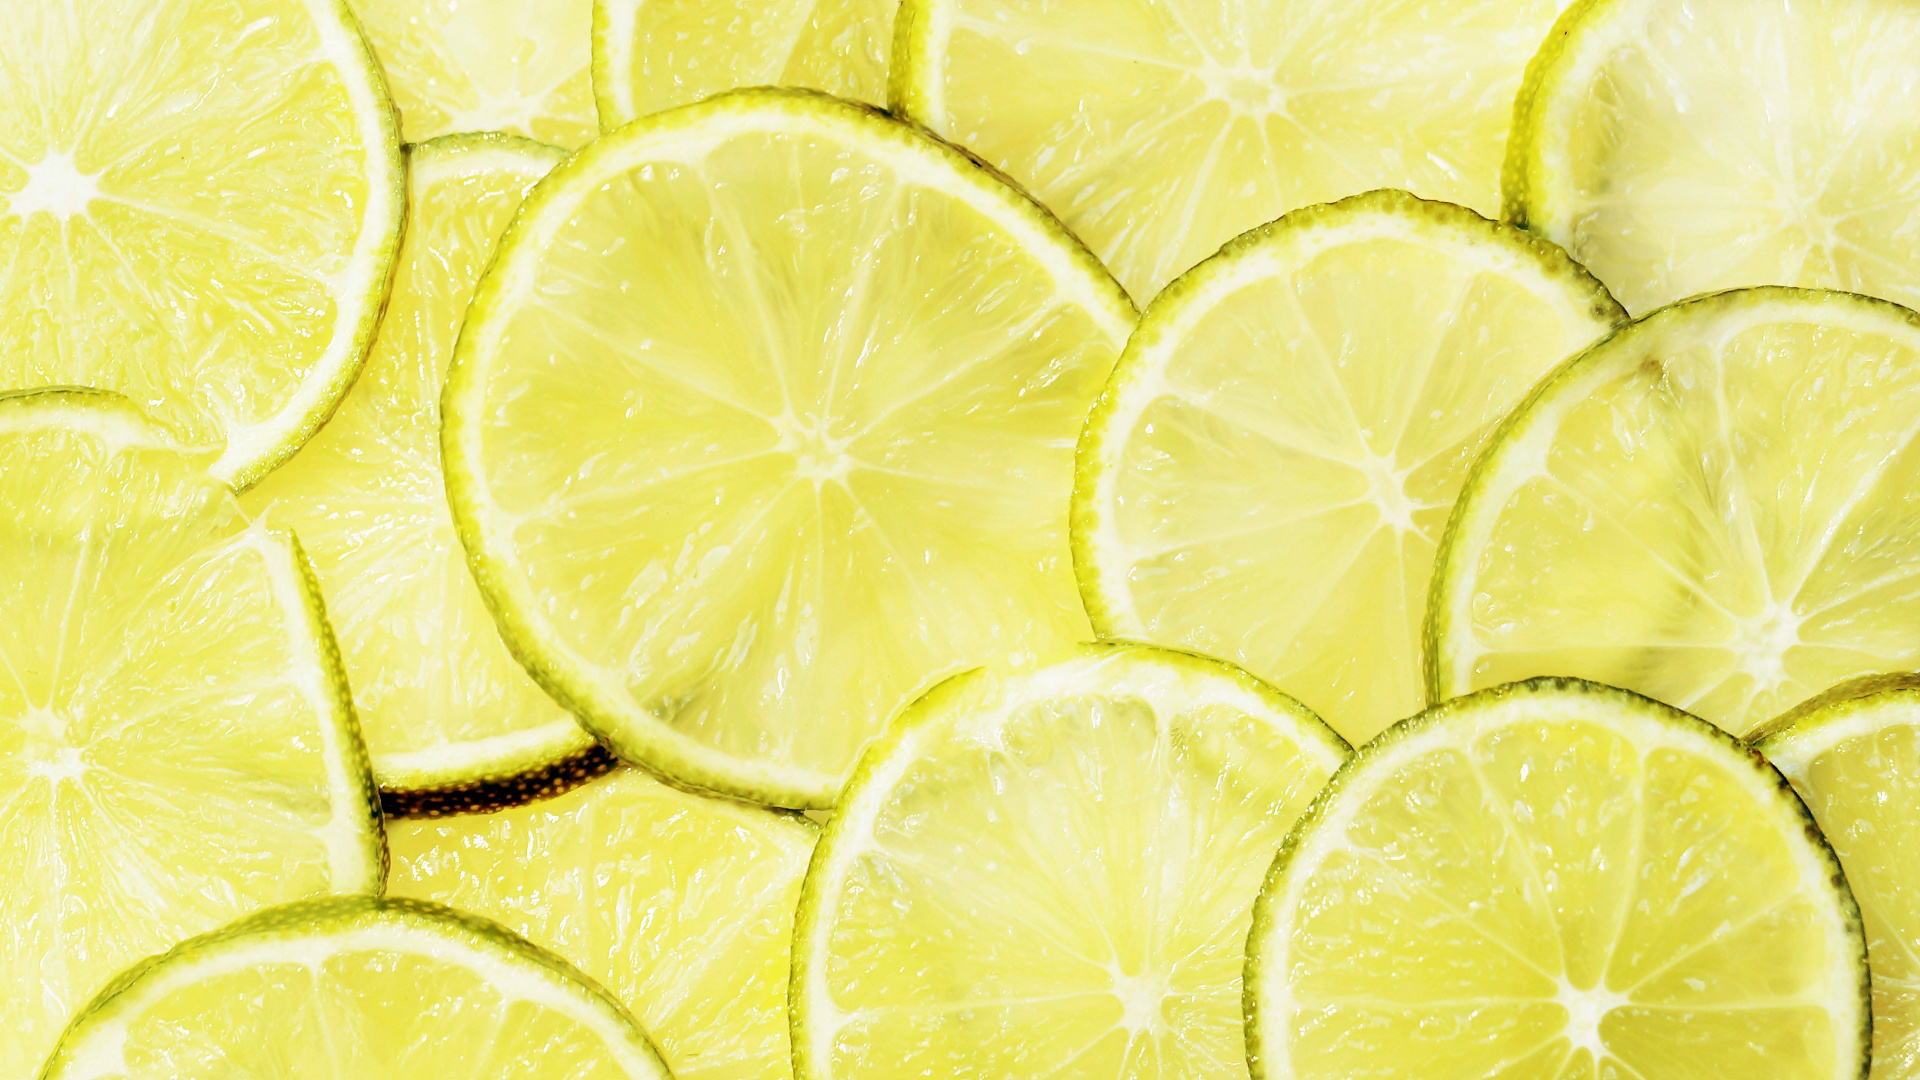 Yellow Lemon Fruit With Water Droplets. Wallpaper in 1920x1080 Resolution